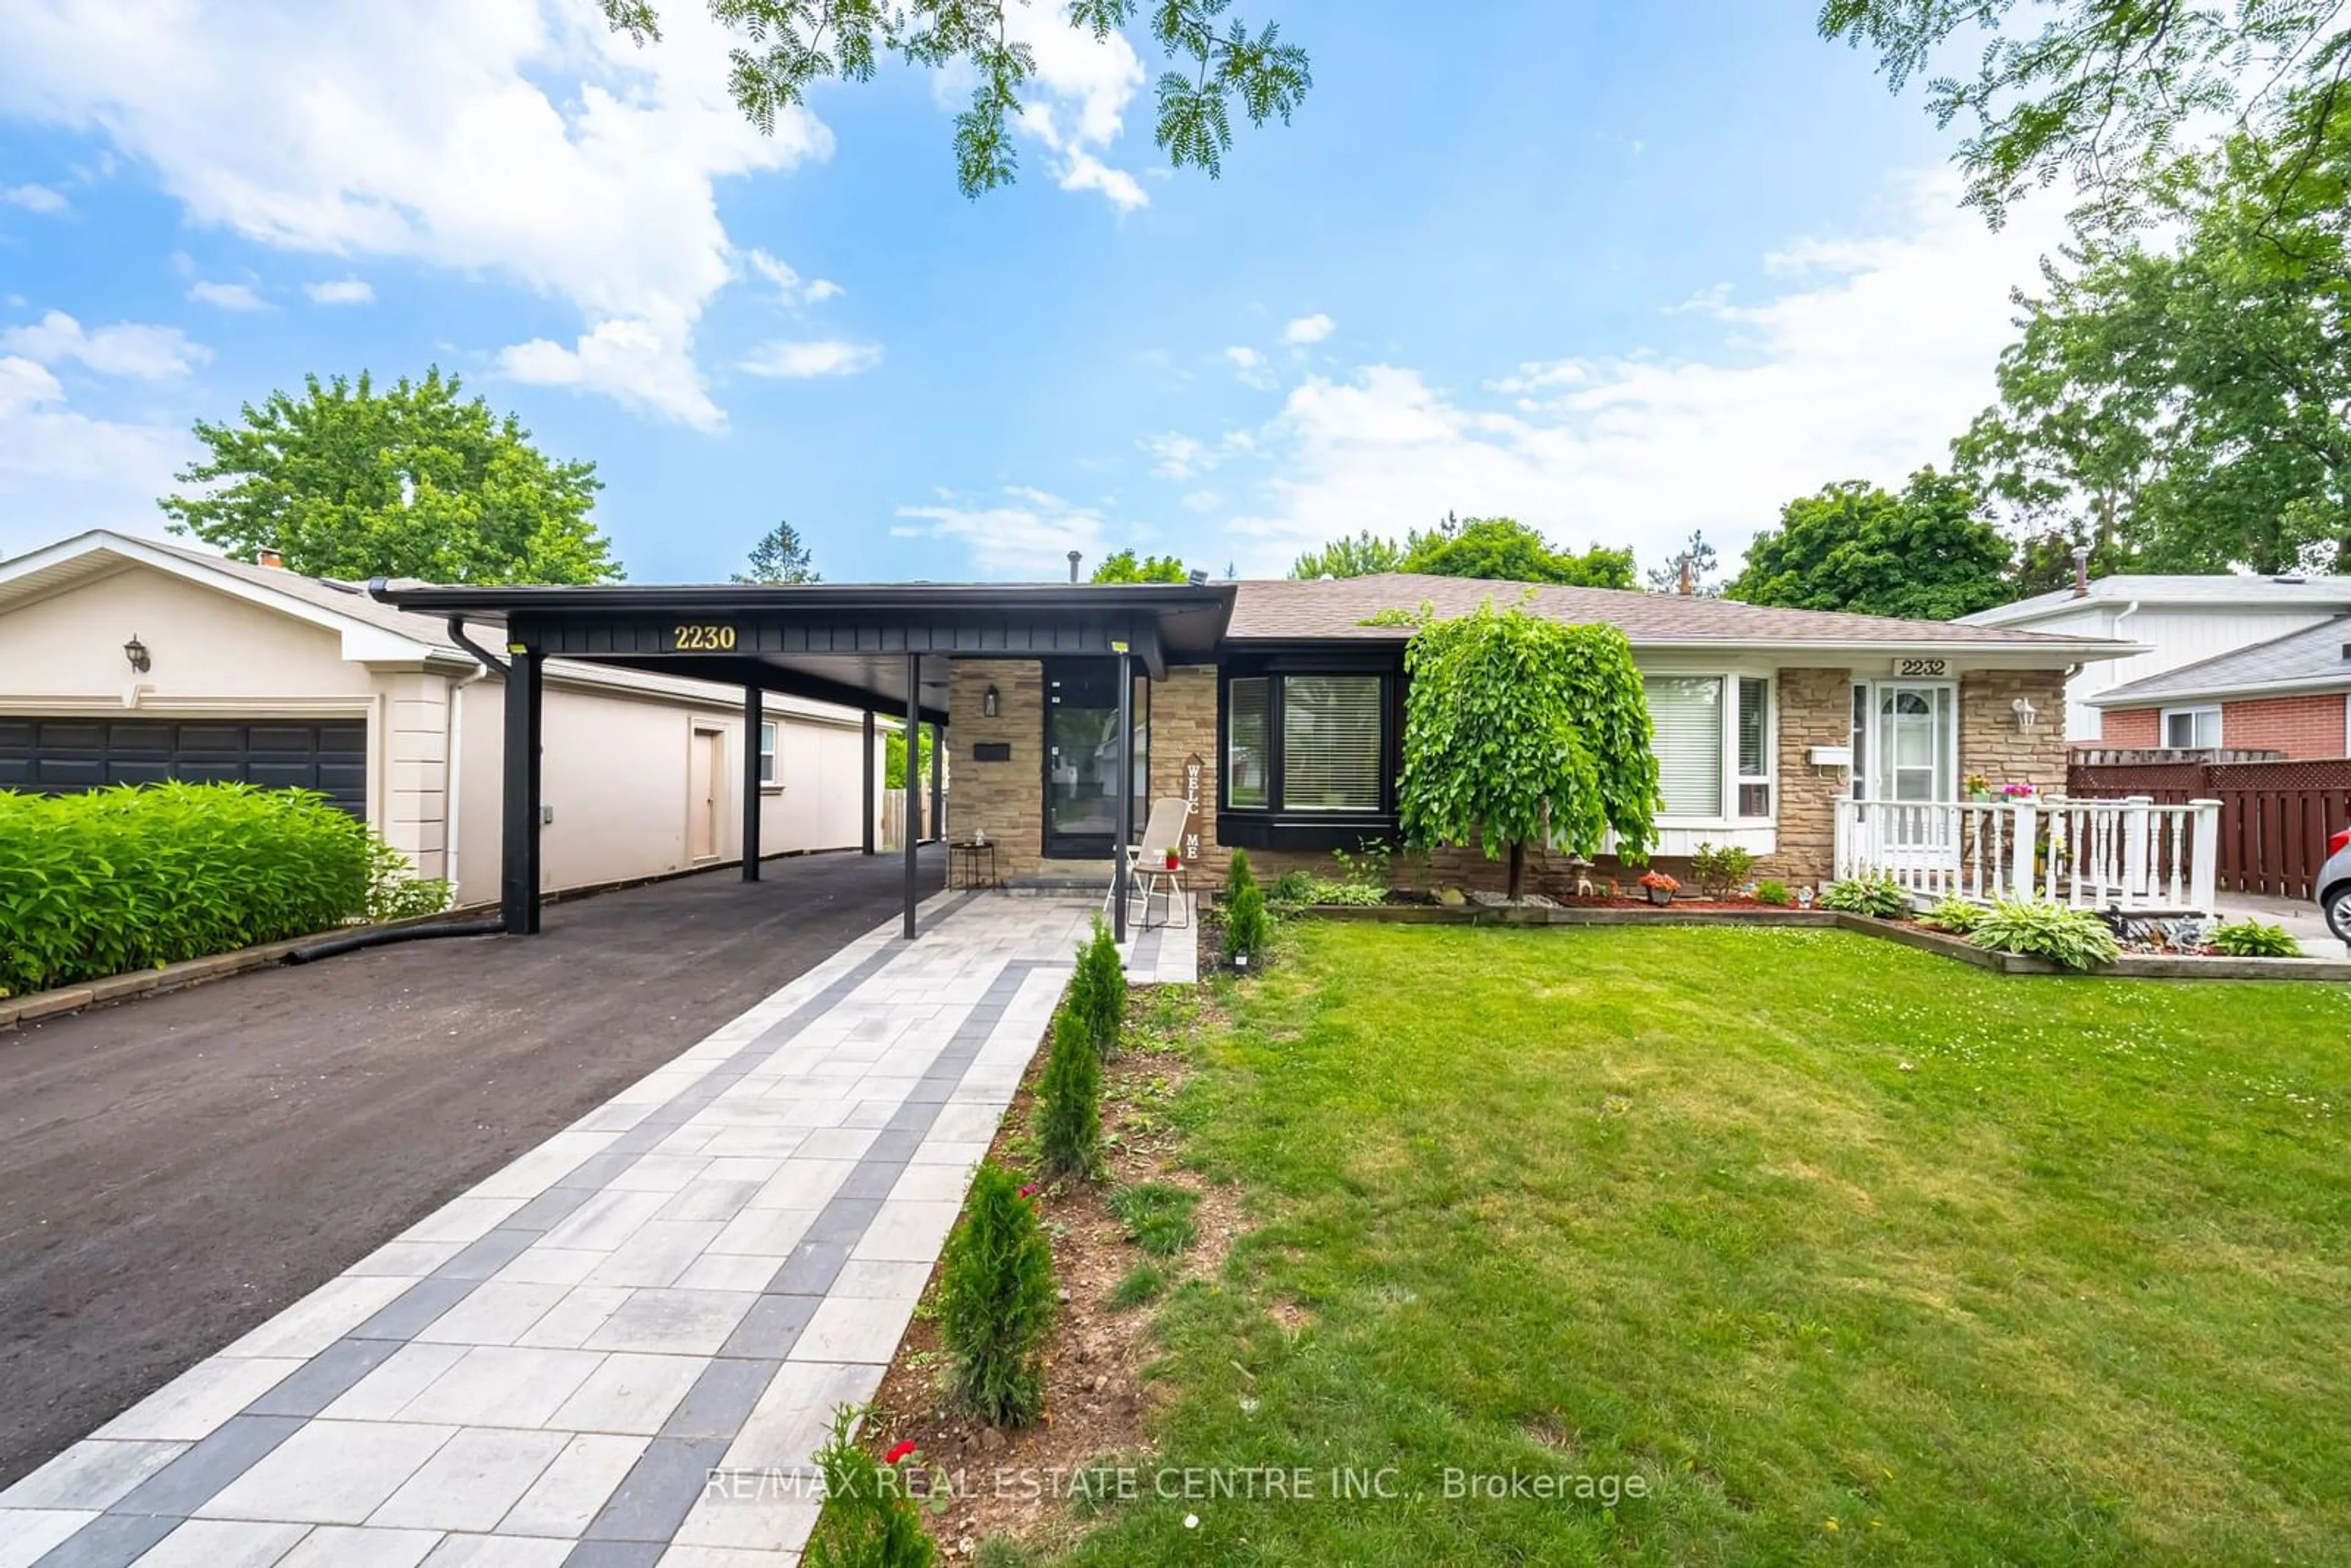 Frontside or backside of a home for 2230 Buttonbush Cres, Mississauga Ontario L5L 1C5